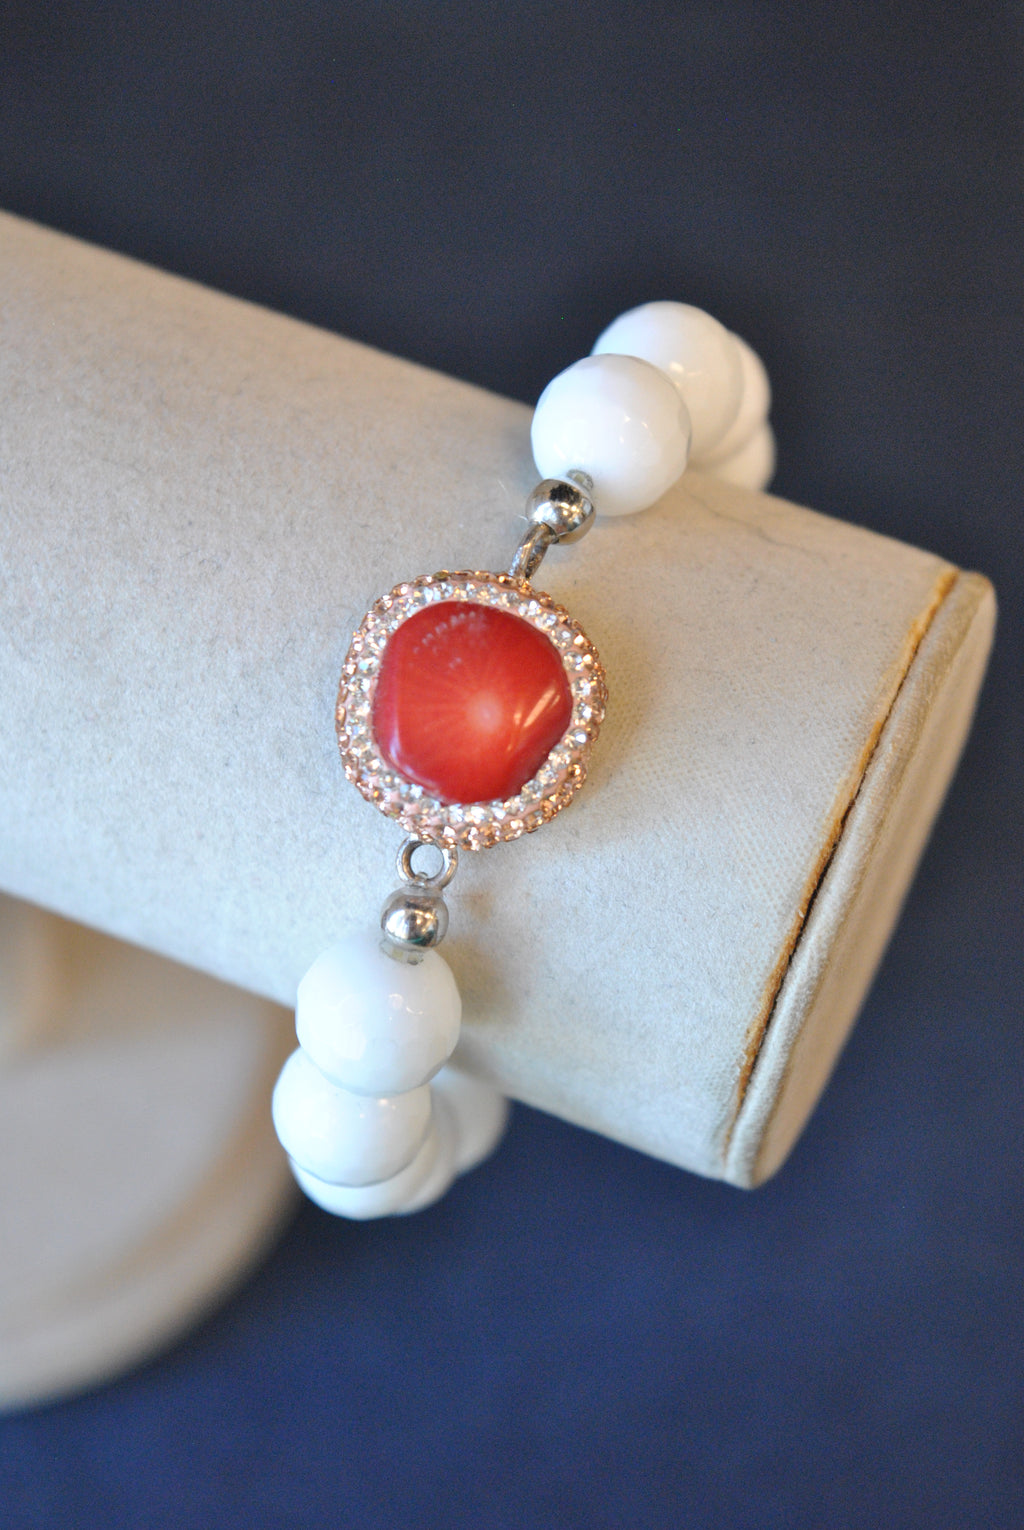 WHITE ONYX AND RED CORAL WITH SWAROVSKI CRYSTALS